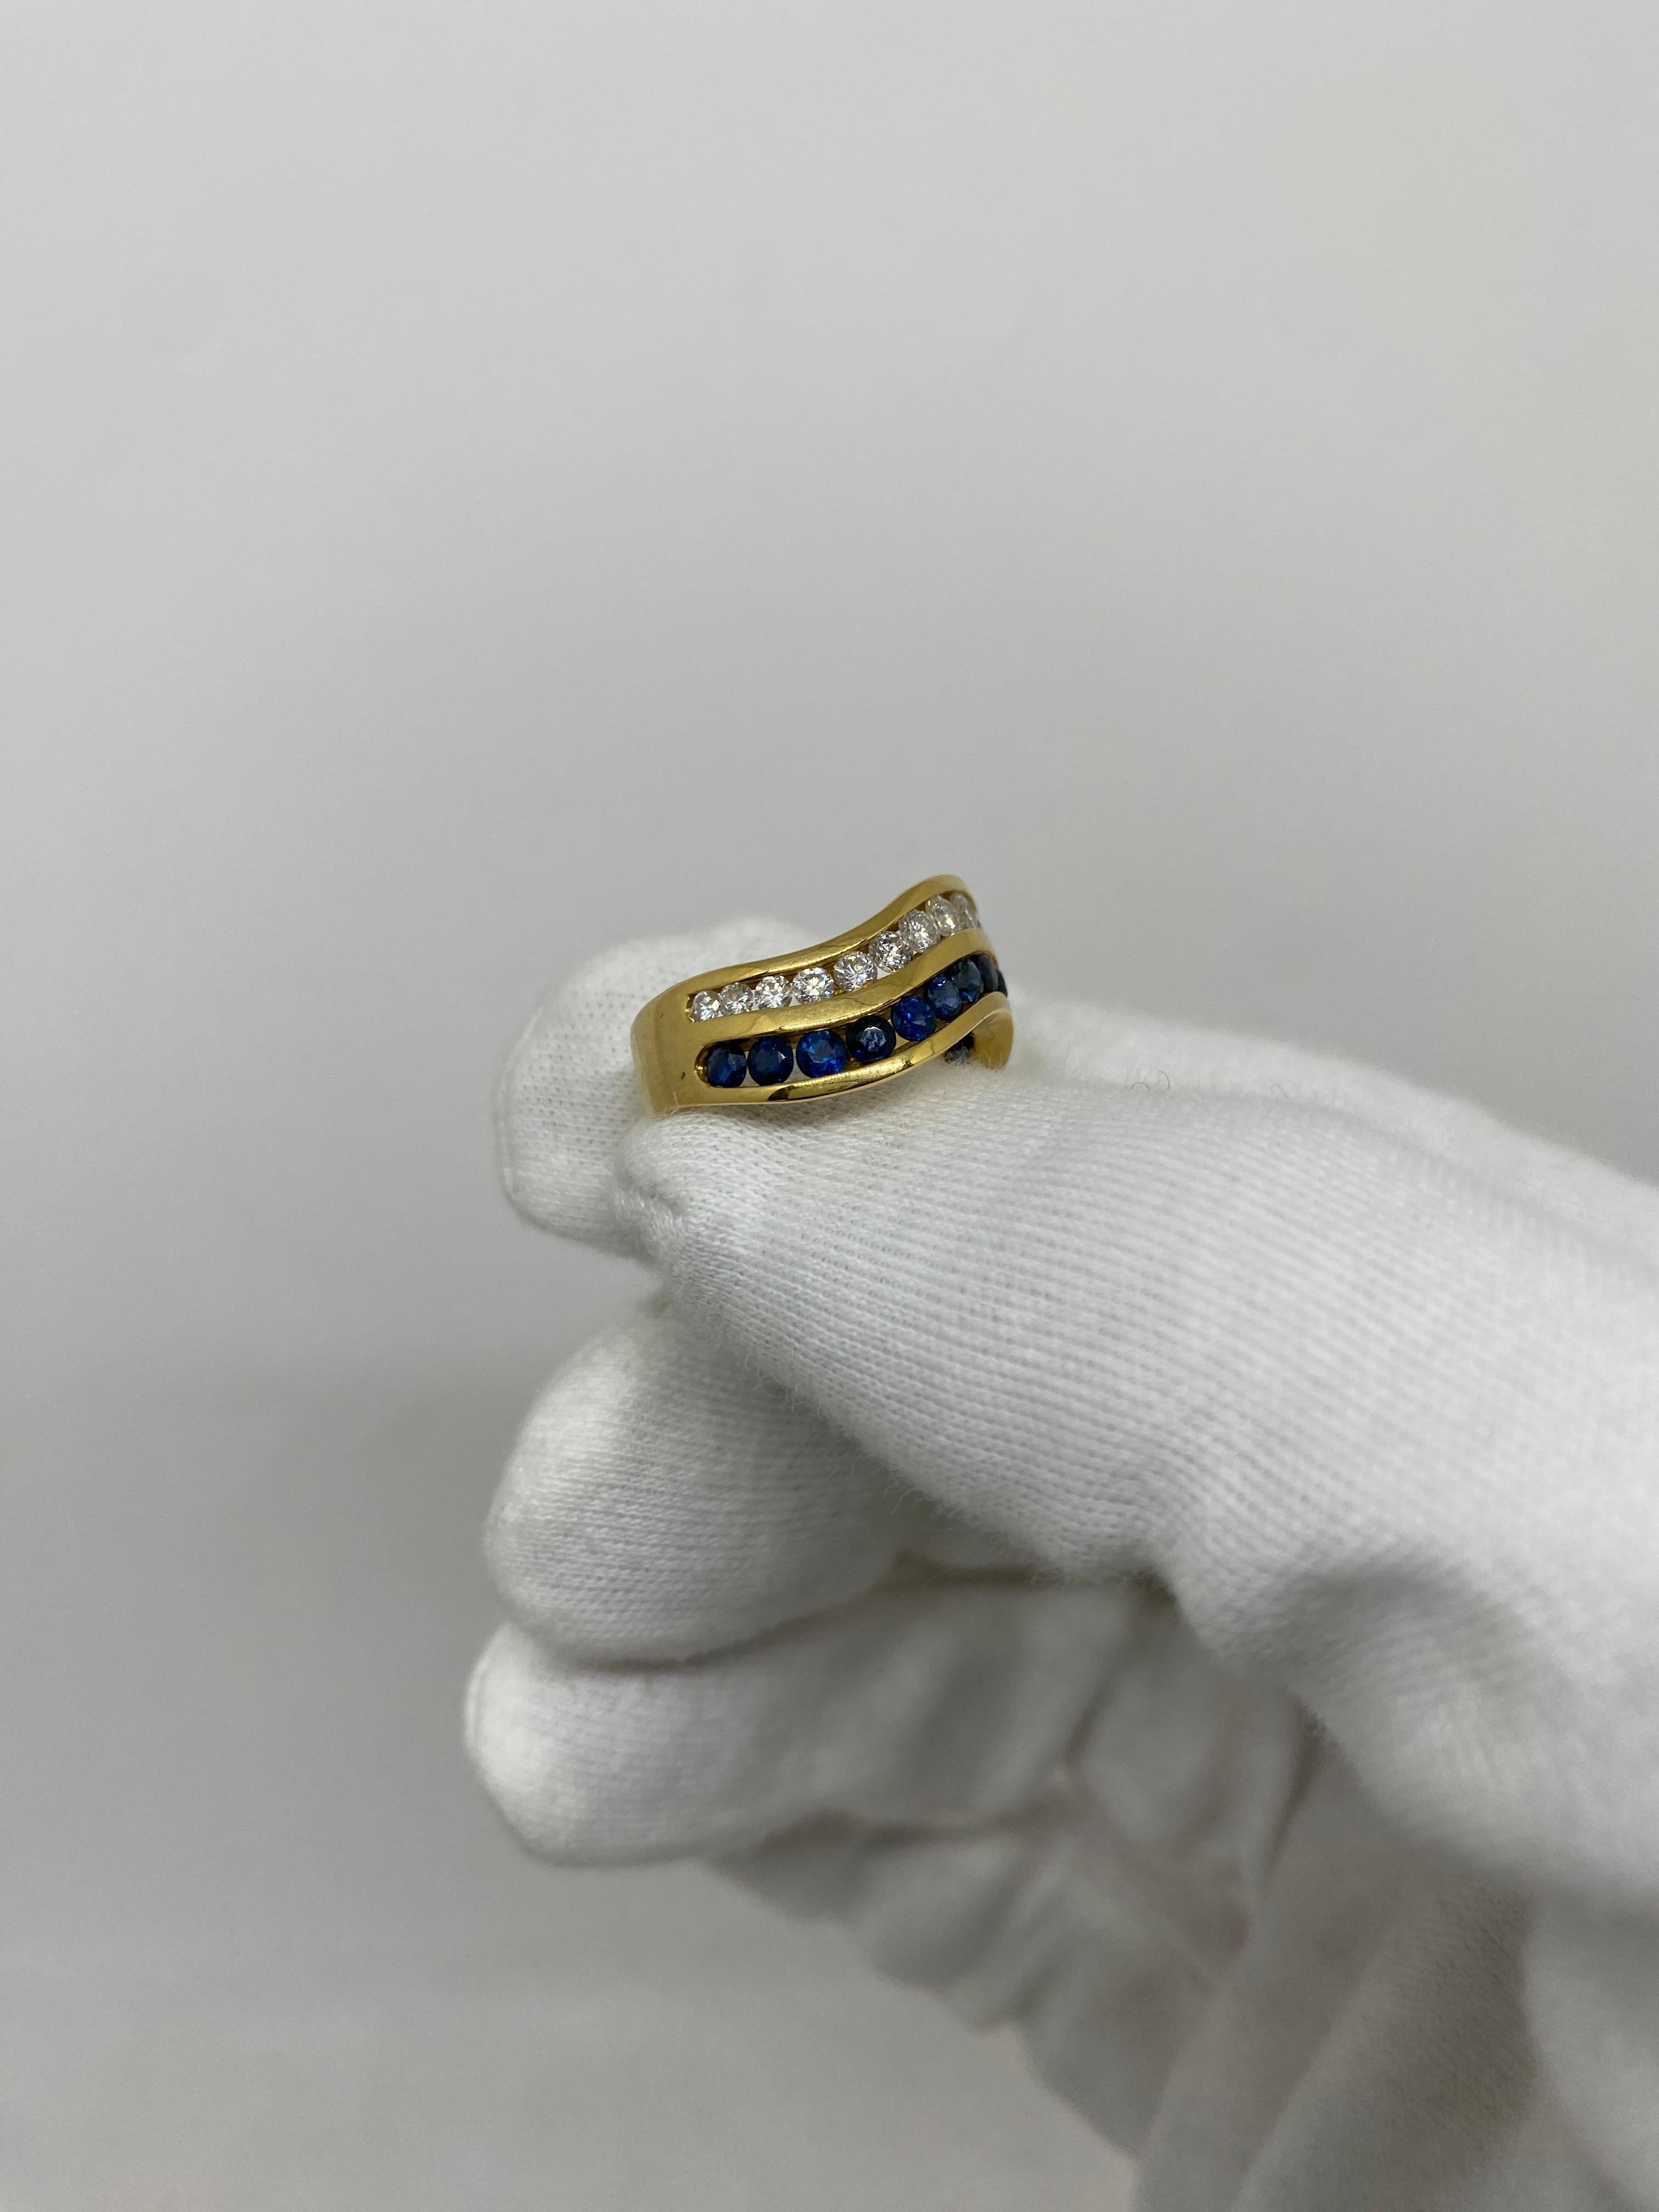 Brilliant Cut 18kt Yellow Gold Vintage Ring 1.33ct Blue Sapphires & 0.92ct White Diamonds For Sale